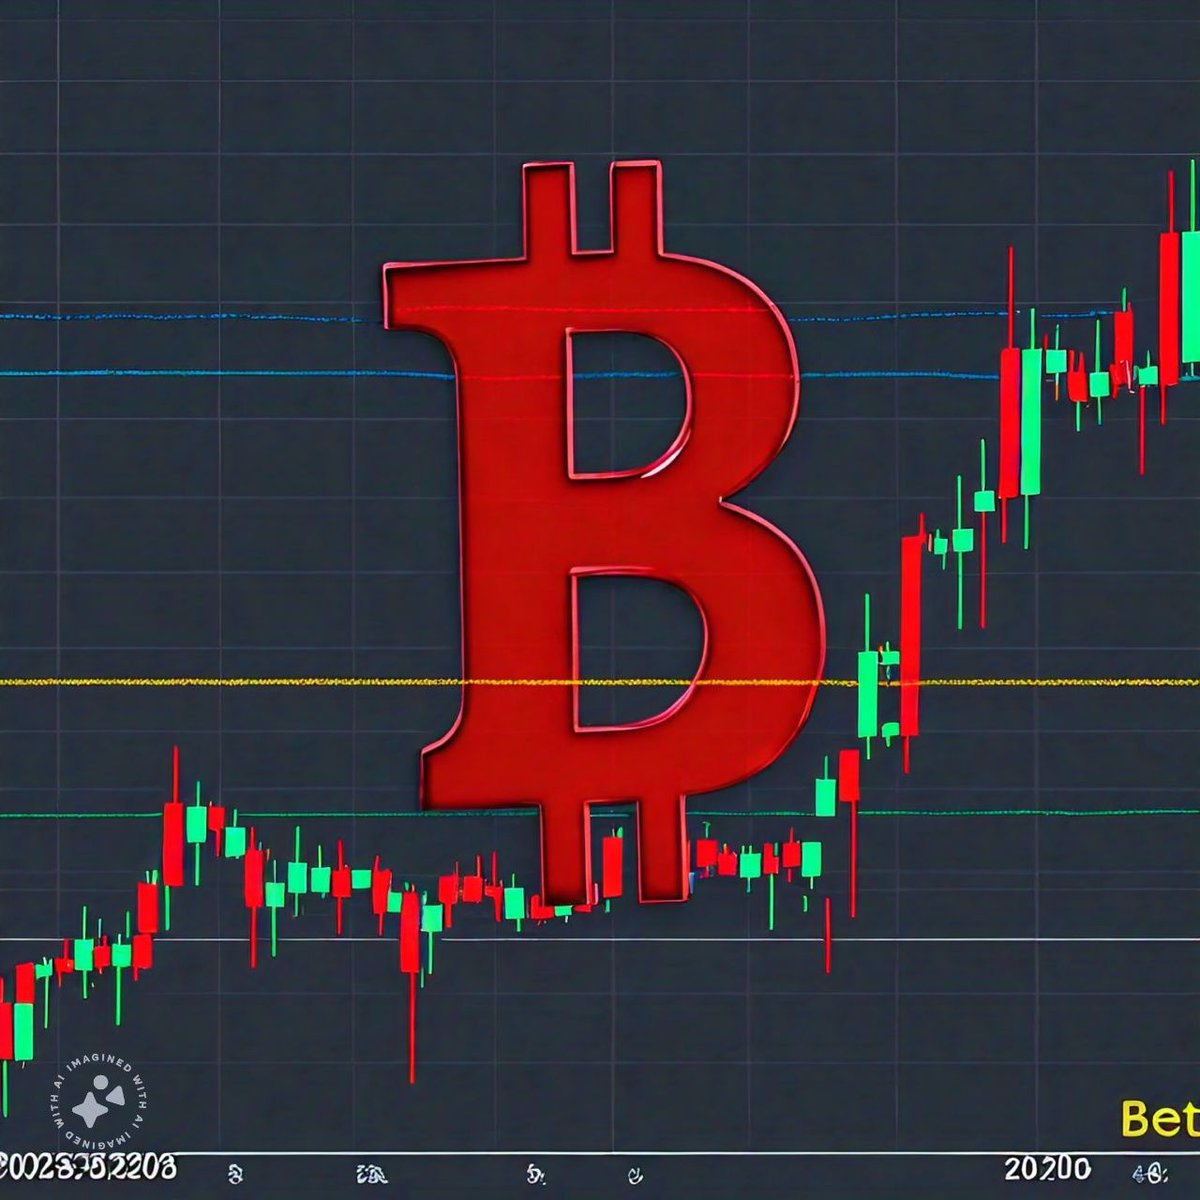 Bitcoin's price plummets! Some blame Middle East conflict, others the #Binance CEO prosecution. What's behind this free fall? Geopolitical tensions or market manipulation? Share your thoughts! #Bitcoin #CryptoNews